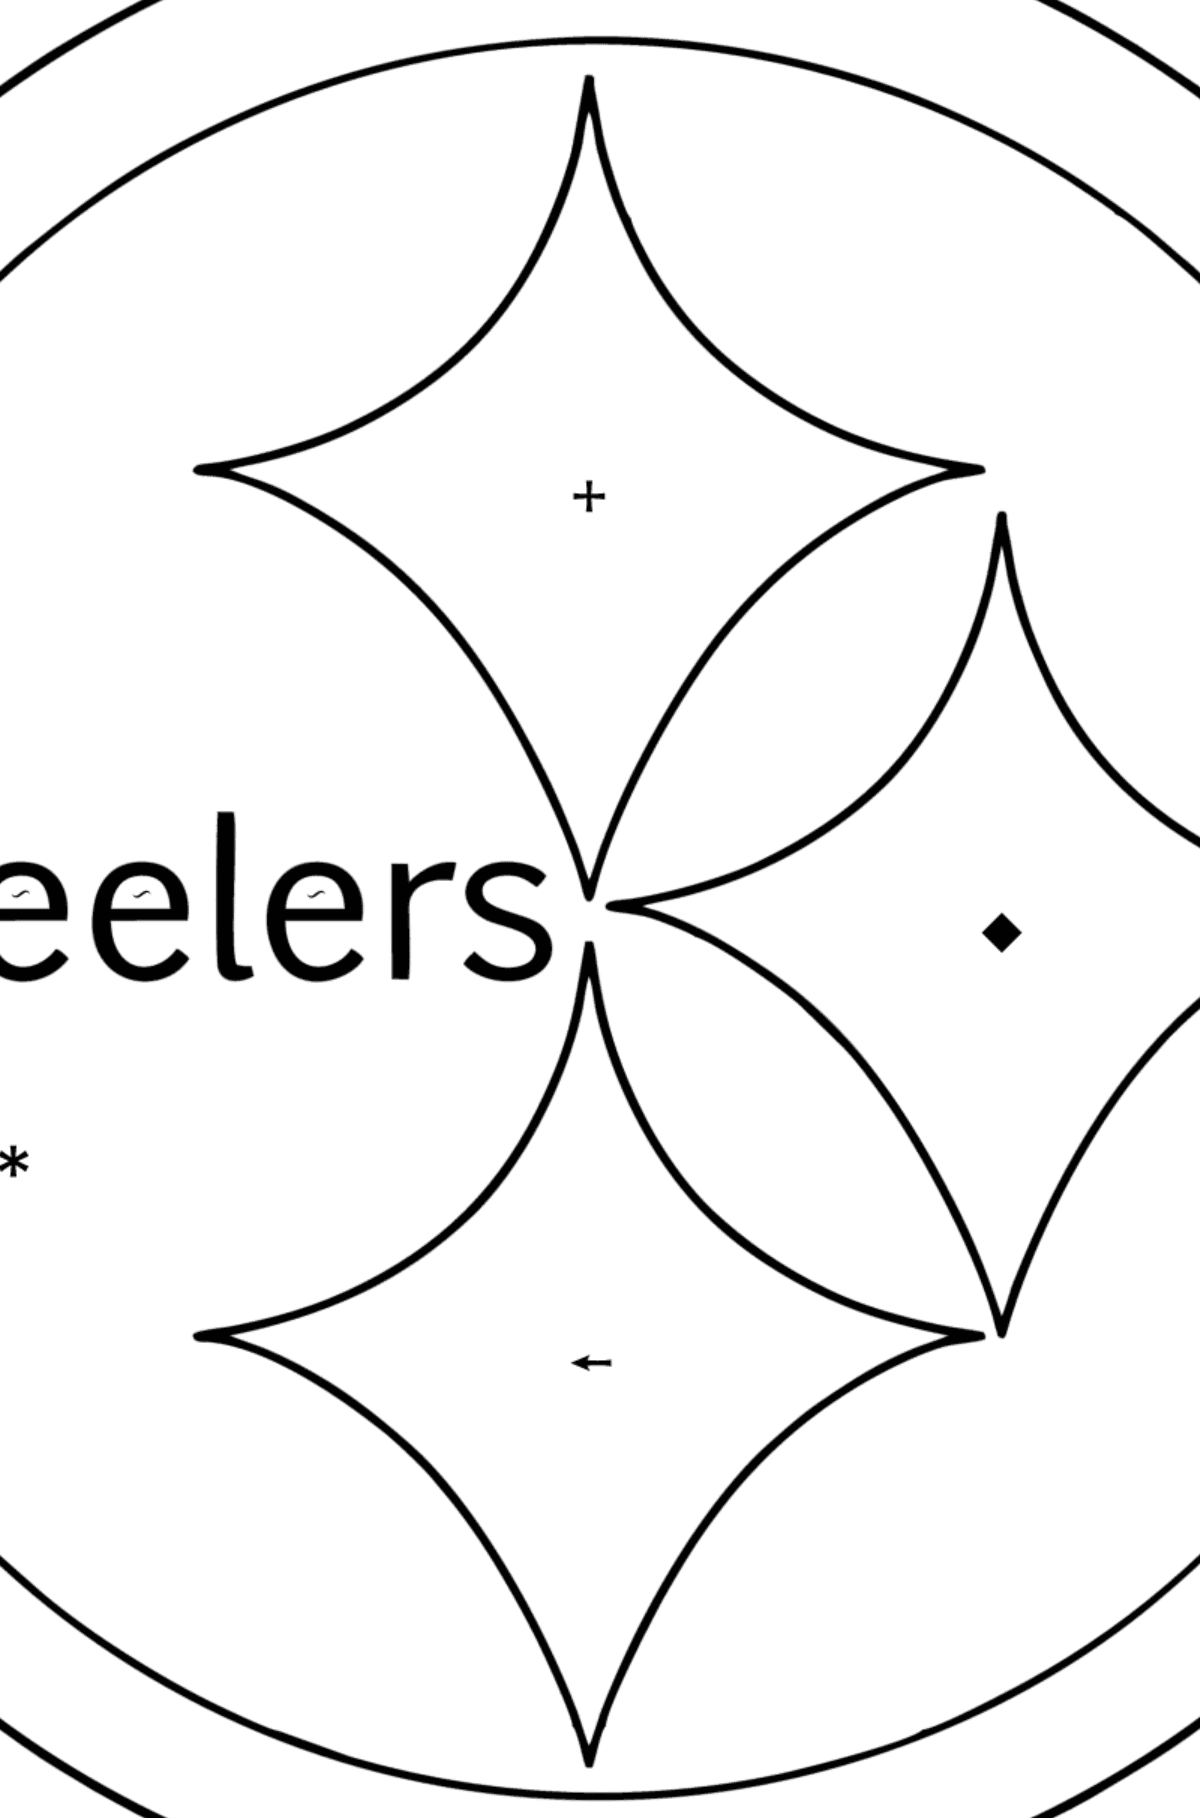 NFL Pittsburgh Steelers сoloring page - Coloring by Symbols for Kids